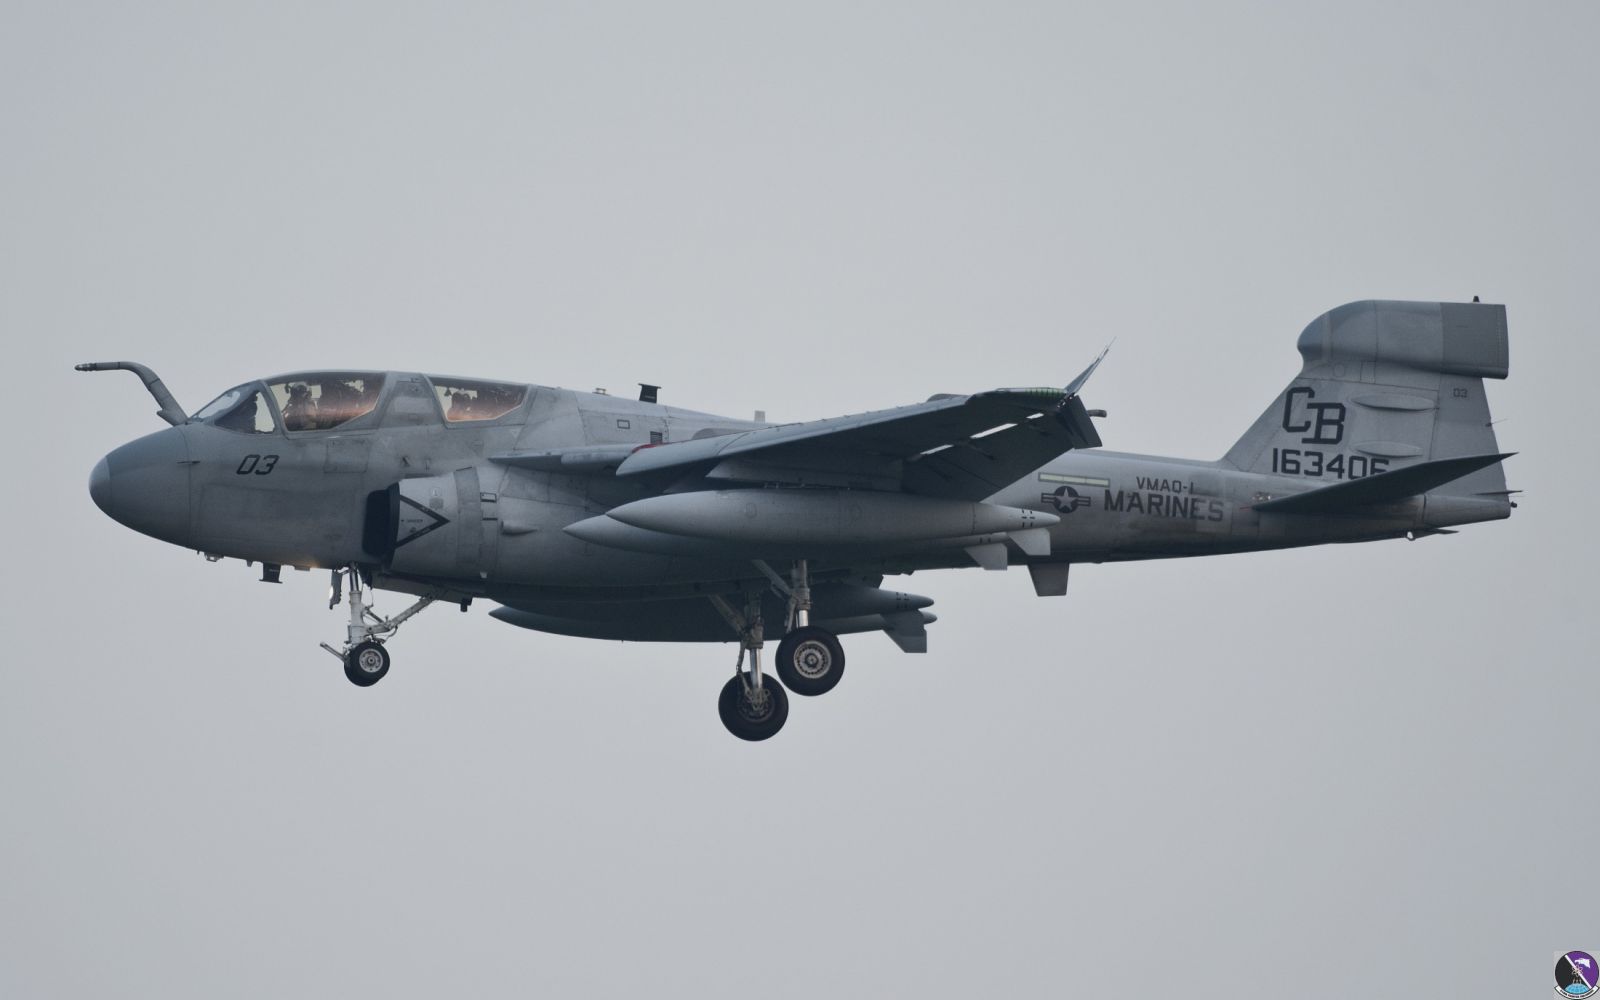 aviano september 10  2011 trend31 ea 6b 163406 03  cb  vmaq 1 mcas cherry point  nc banshee come from homebase for deployment